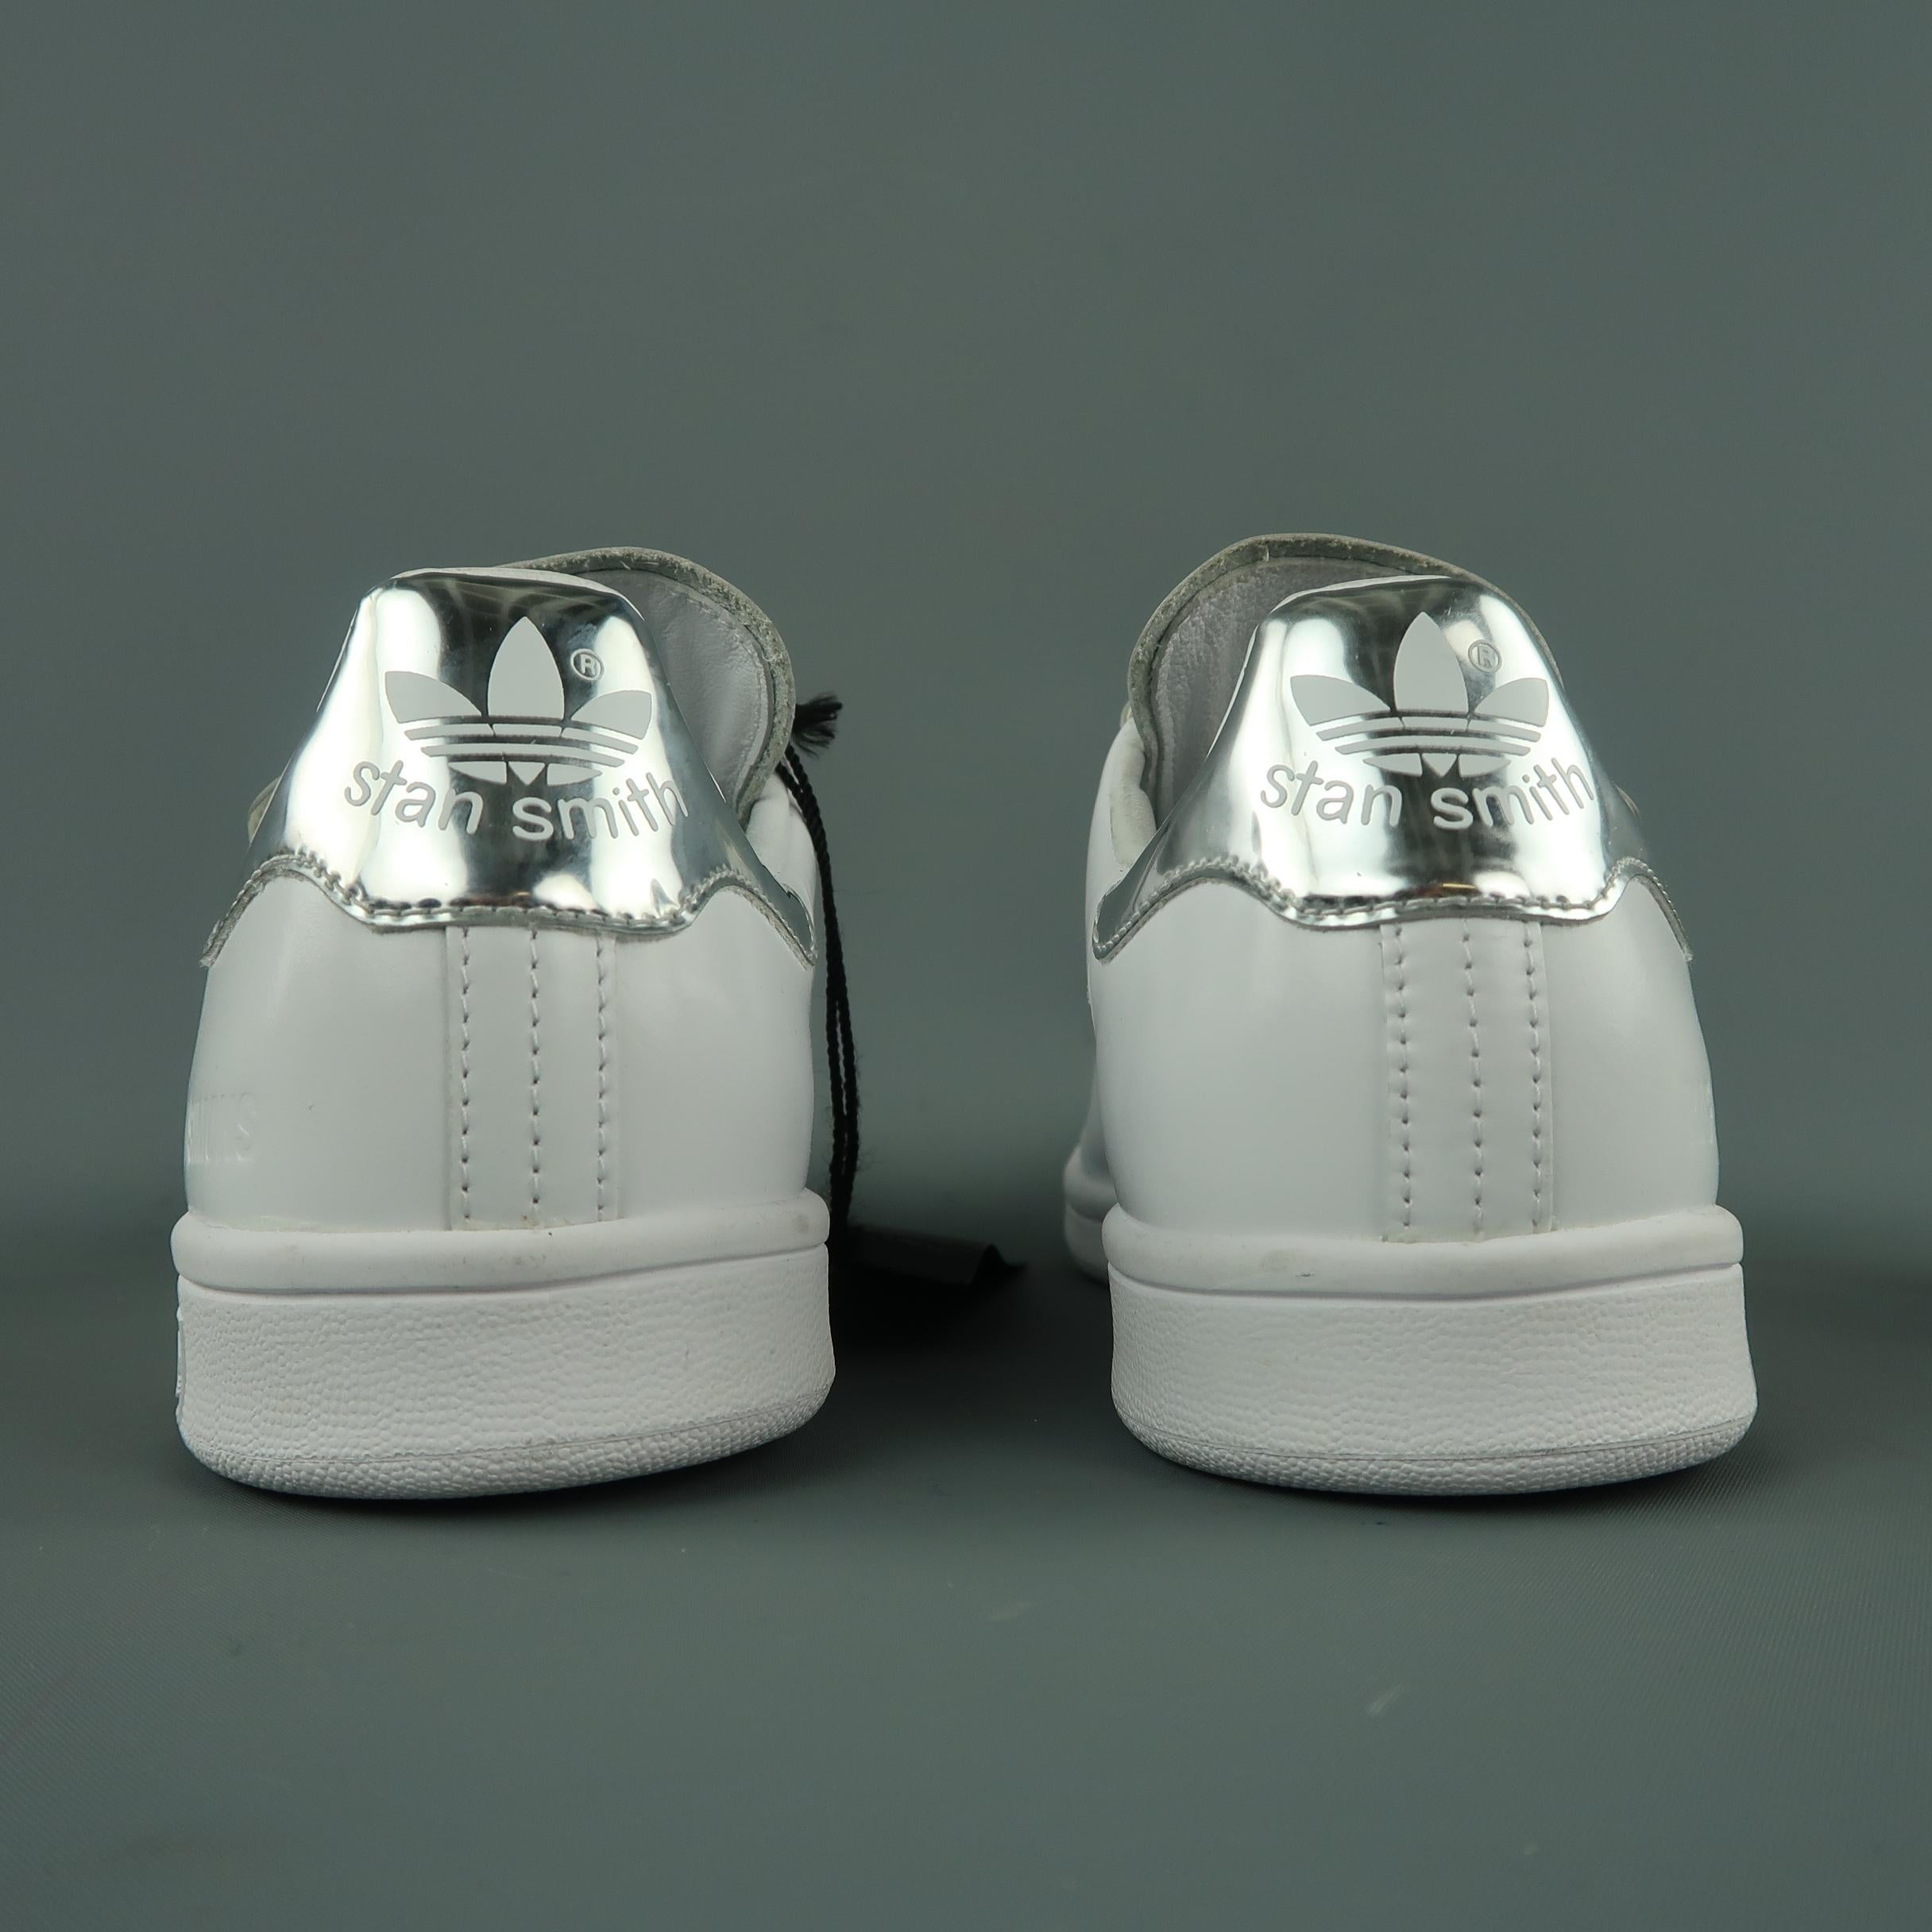 ADIDAS X RAF SIMONS Size 8.5 White Solid Leather Sneakers 3